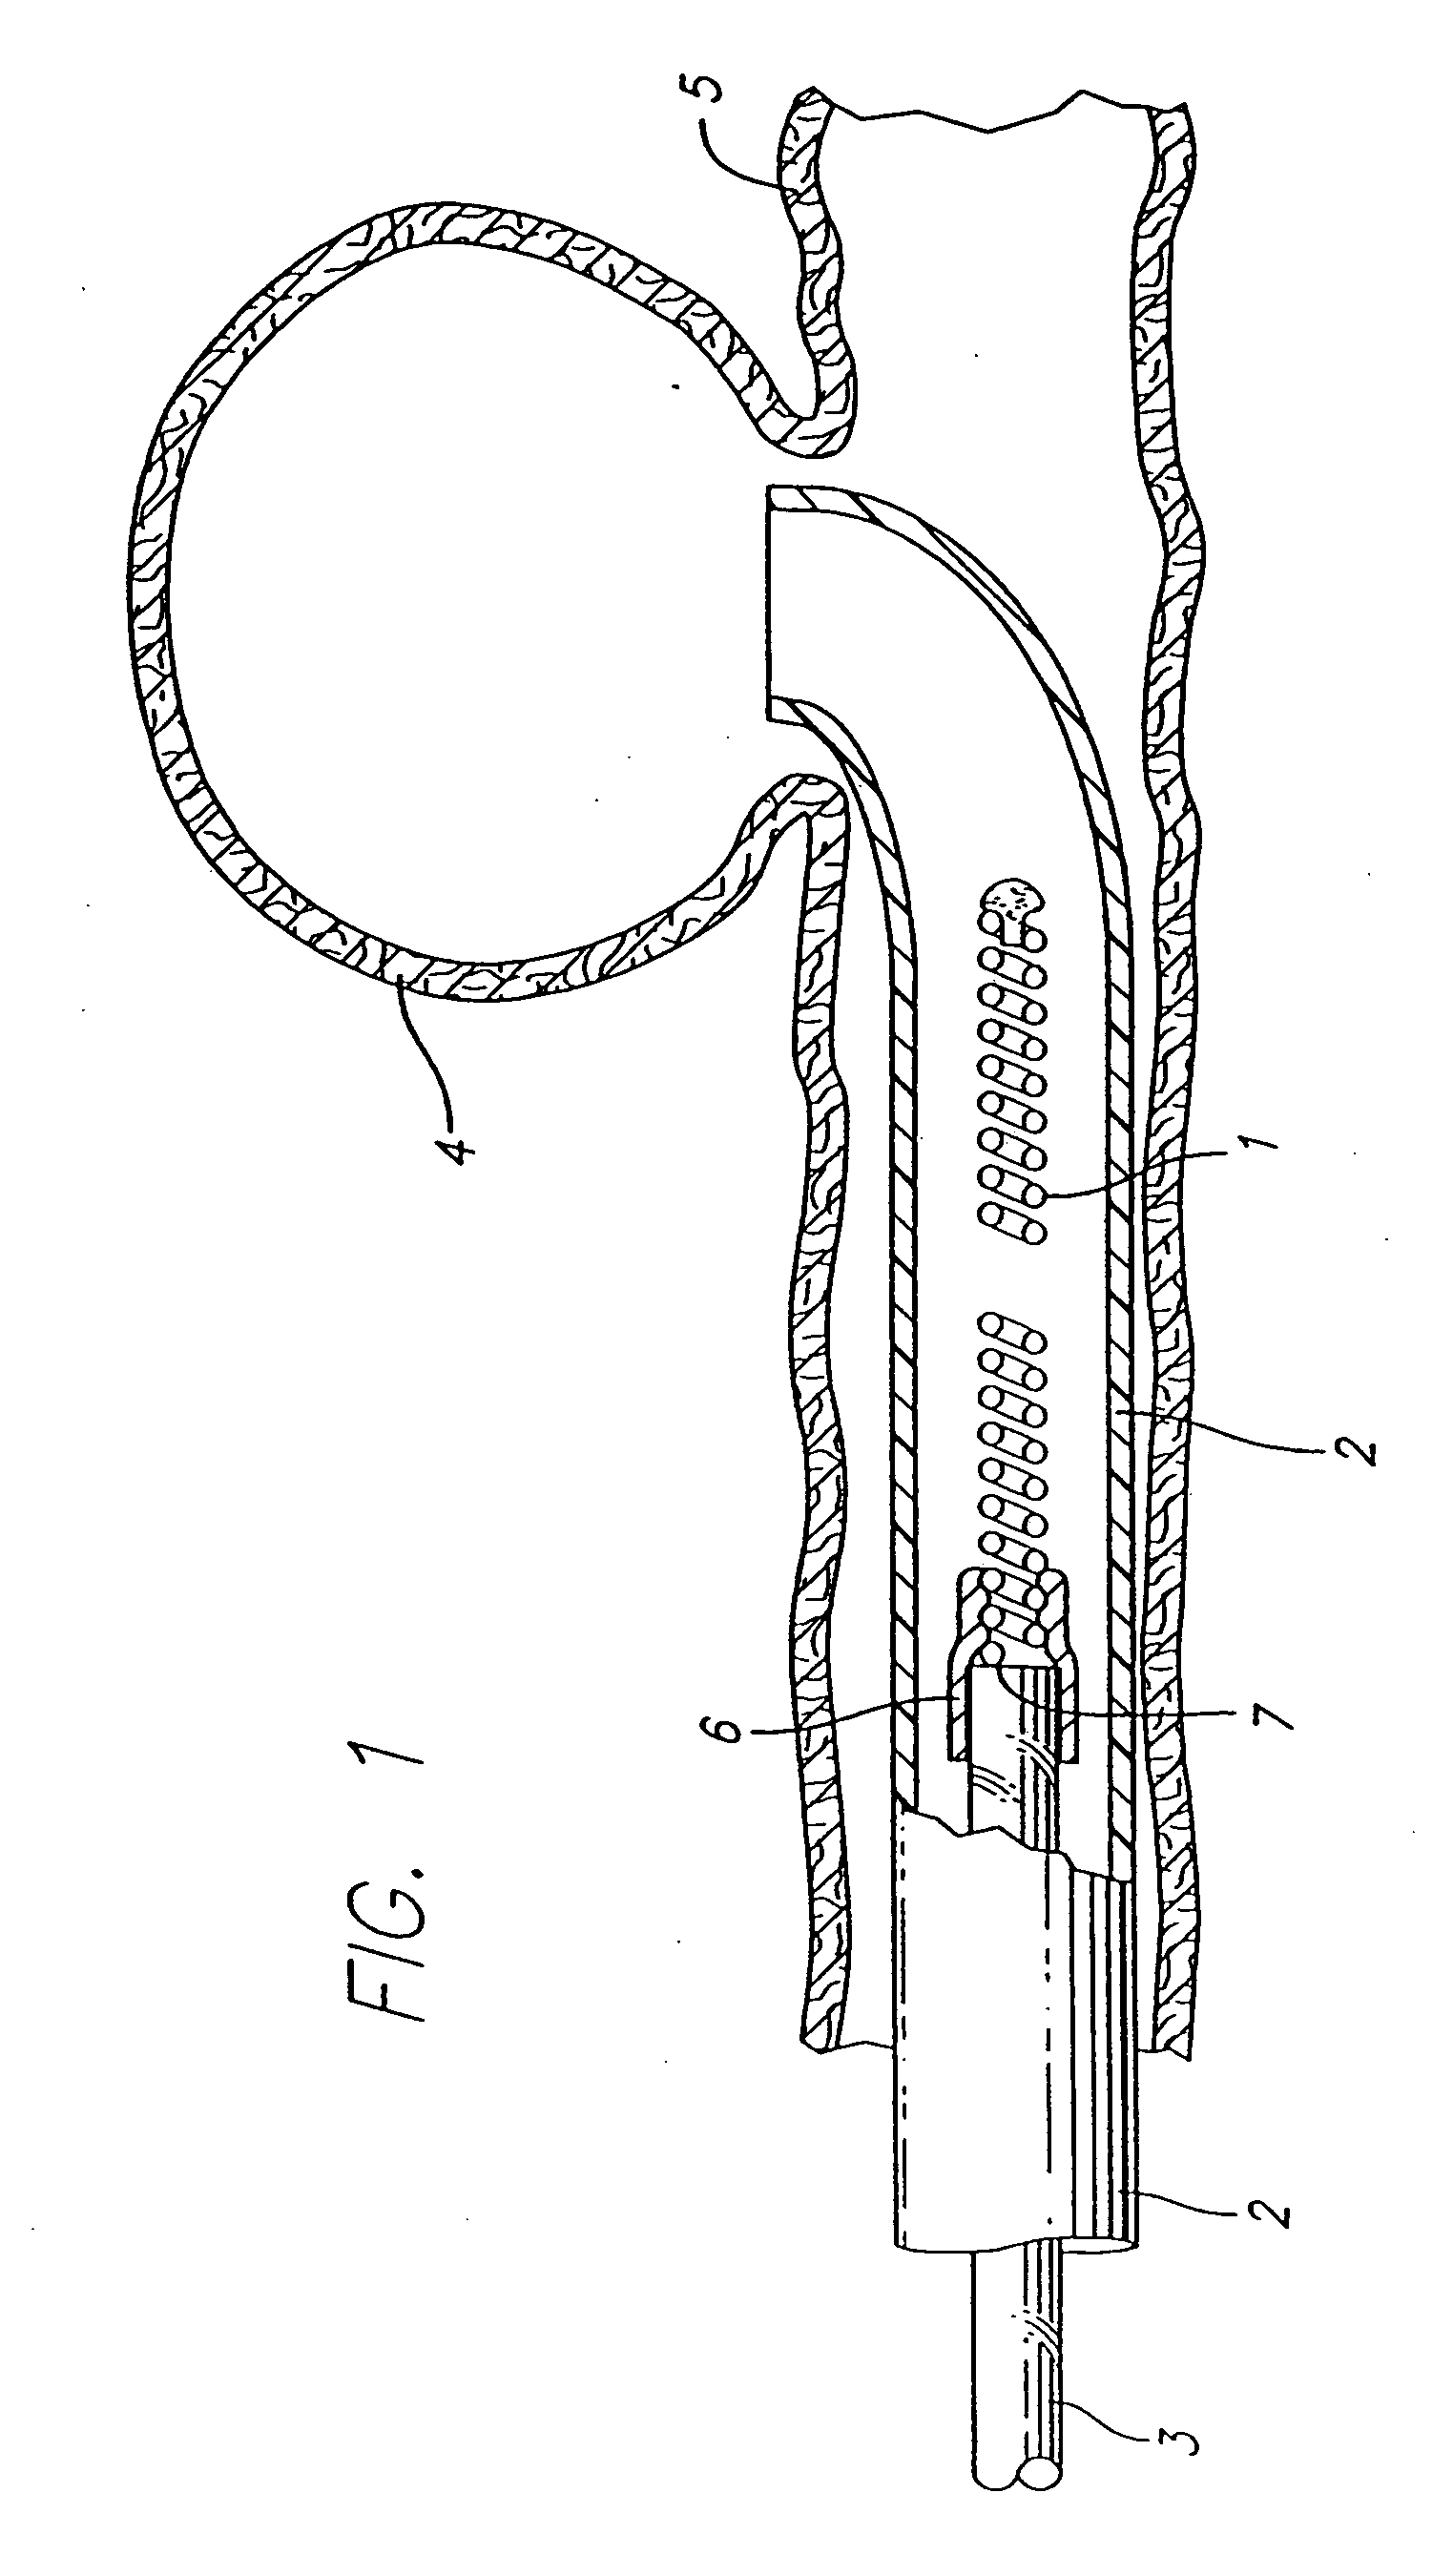 Three dimensional, low friction vasoocclusive coil, and method of manufacture